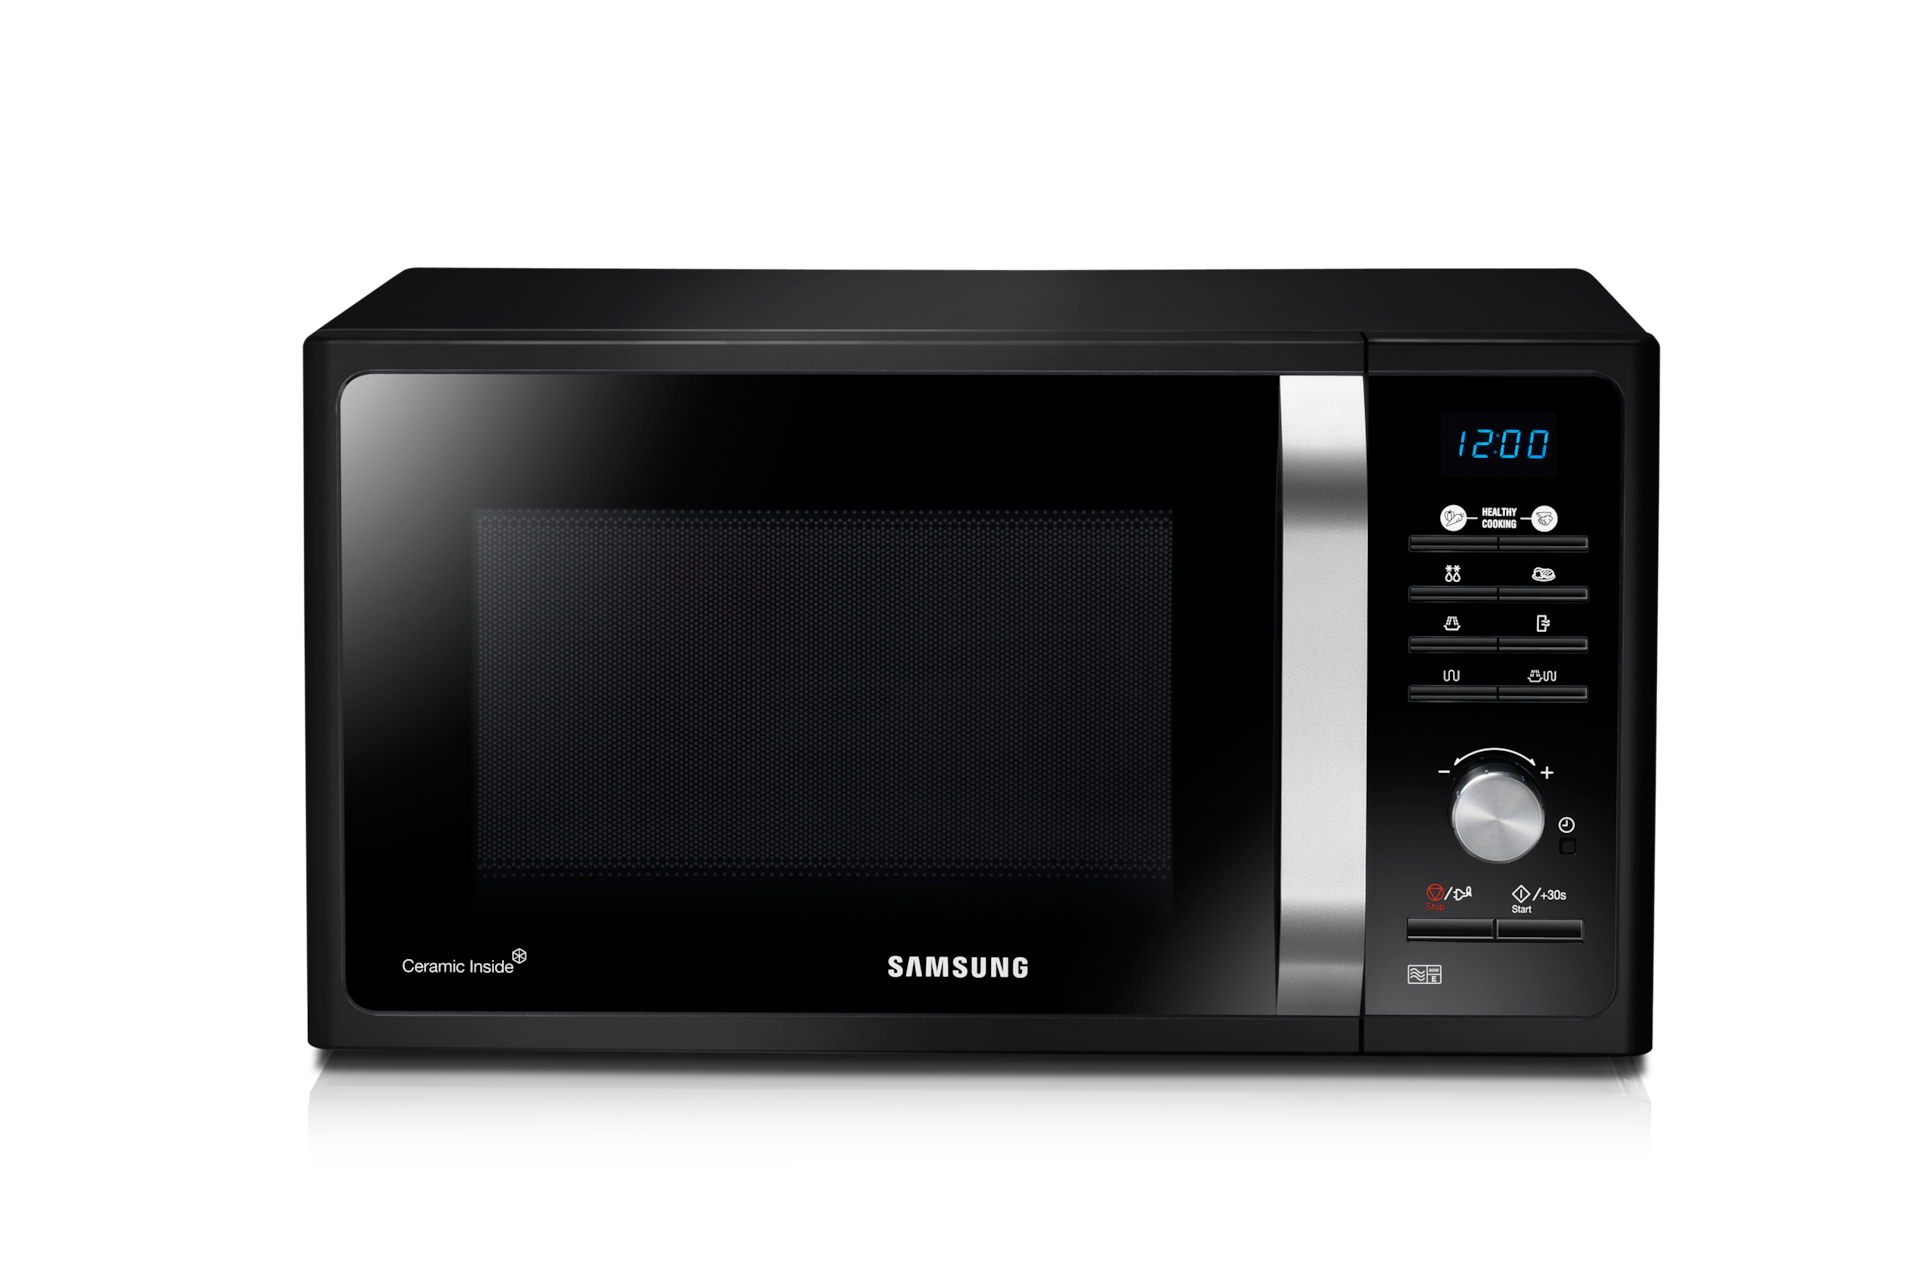 https://images.samsung.com/is/image/samsung/es-microwave-oven-grill-mg23f301tak-mg23f301tak-ec-001-front